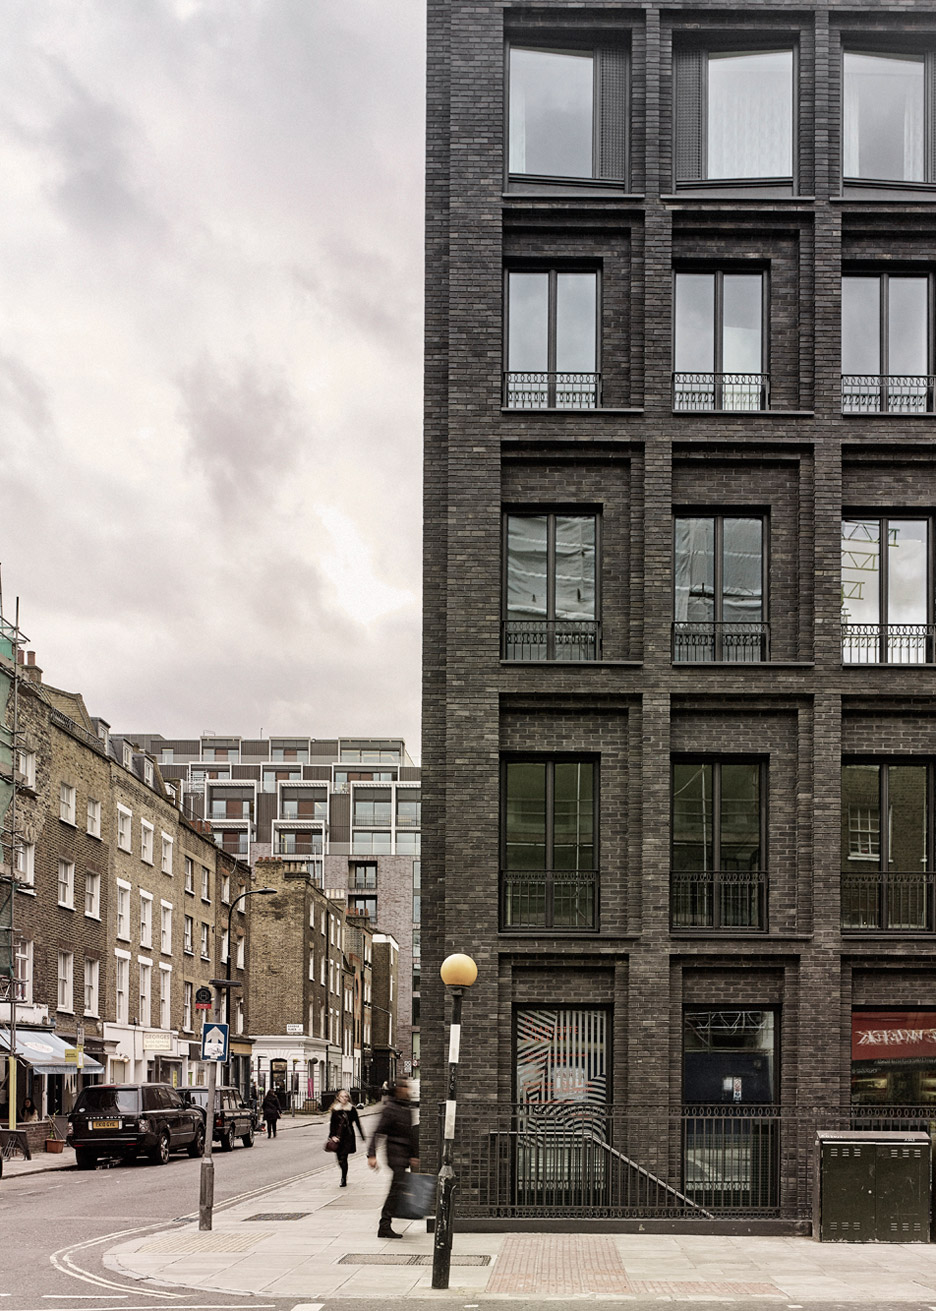 Photograph by Christopher Rudquist Corner House by DSDHA residential mixed-use brick architecture London, UK